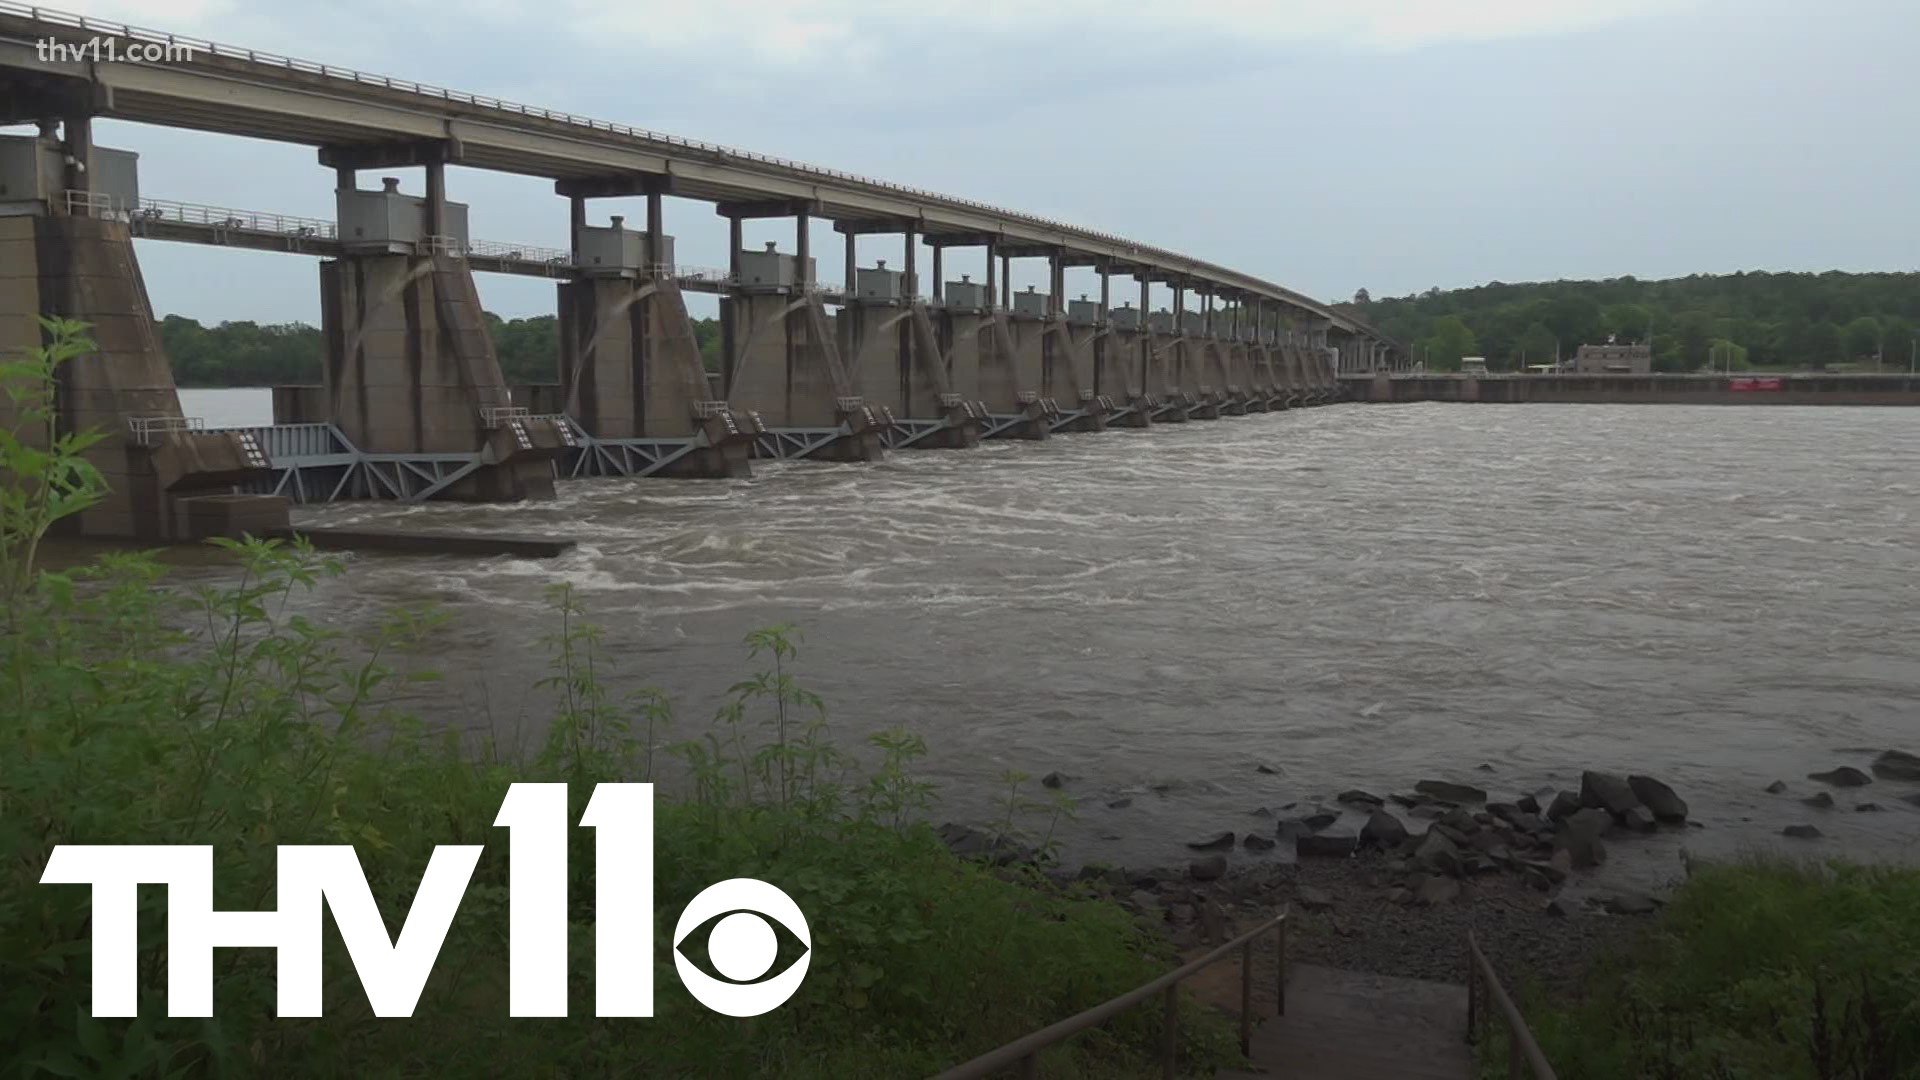 The summer of 2019 saw widespread flooding in Arkansas, with major damage along stretches of the Arkansas River in Central Arkansas.